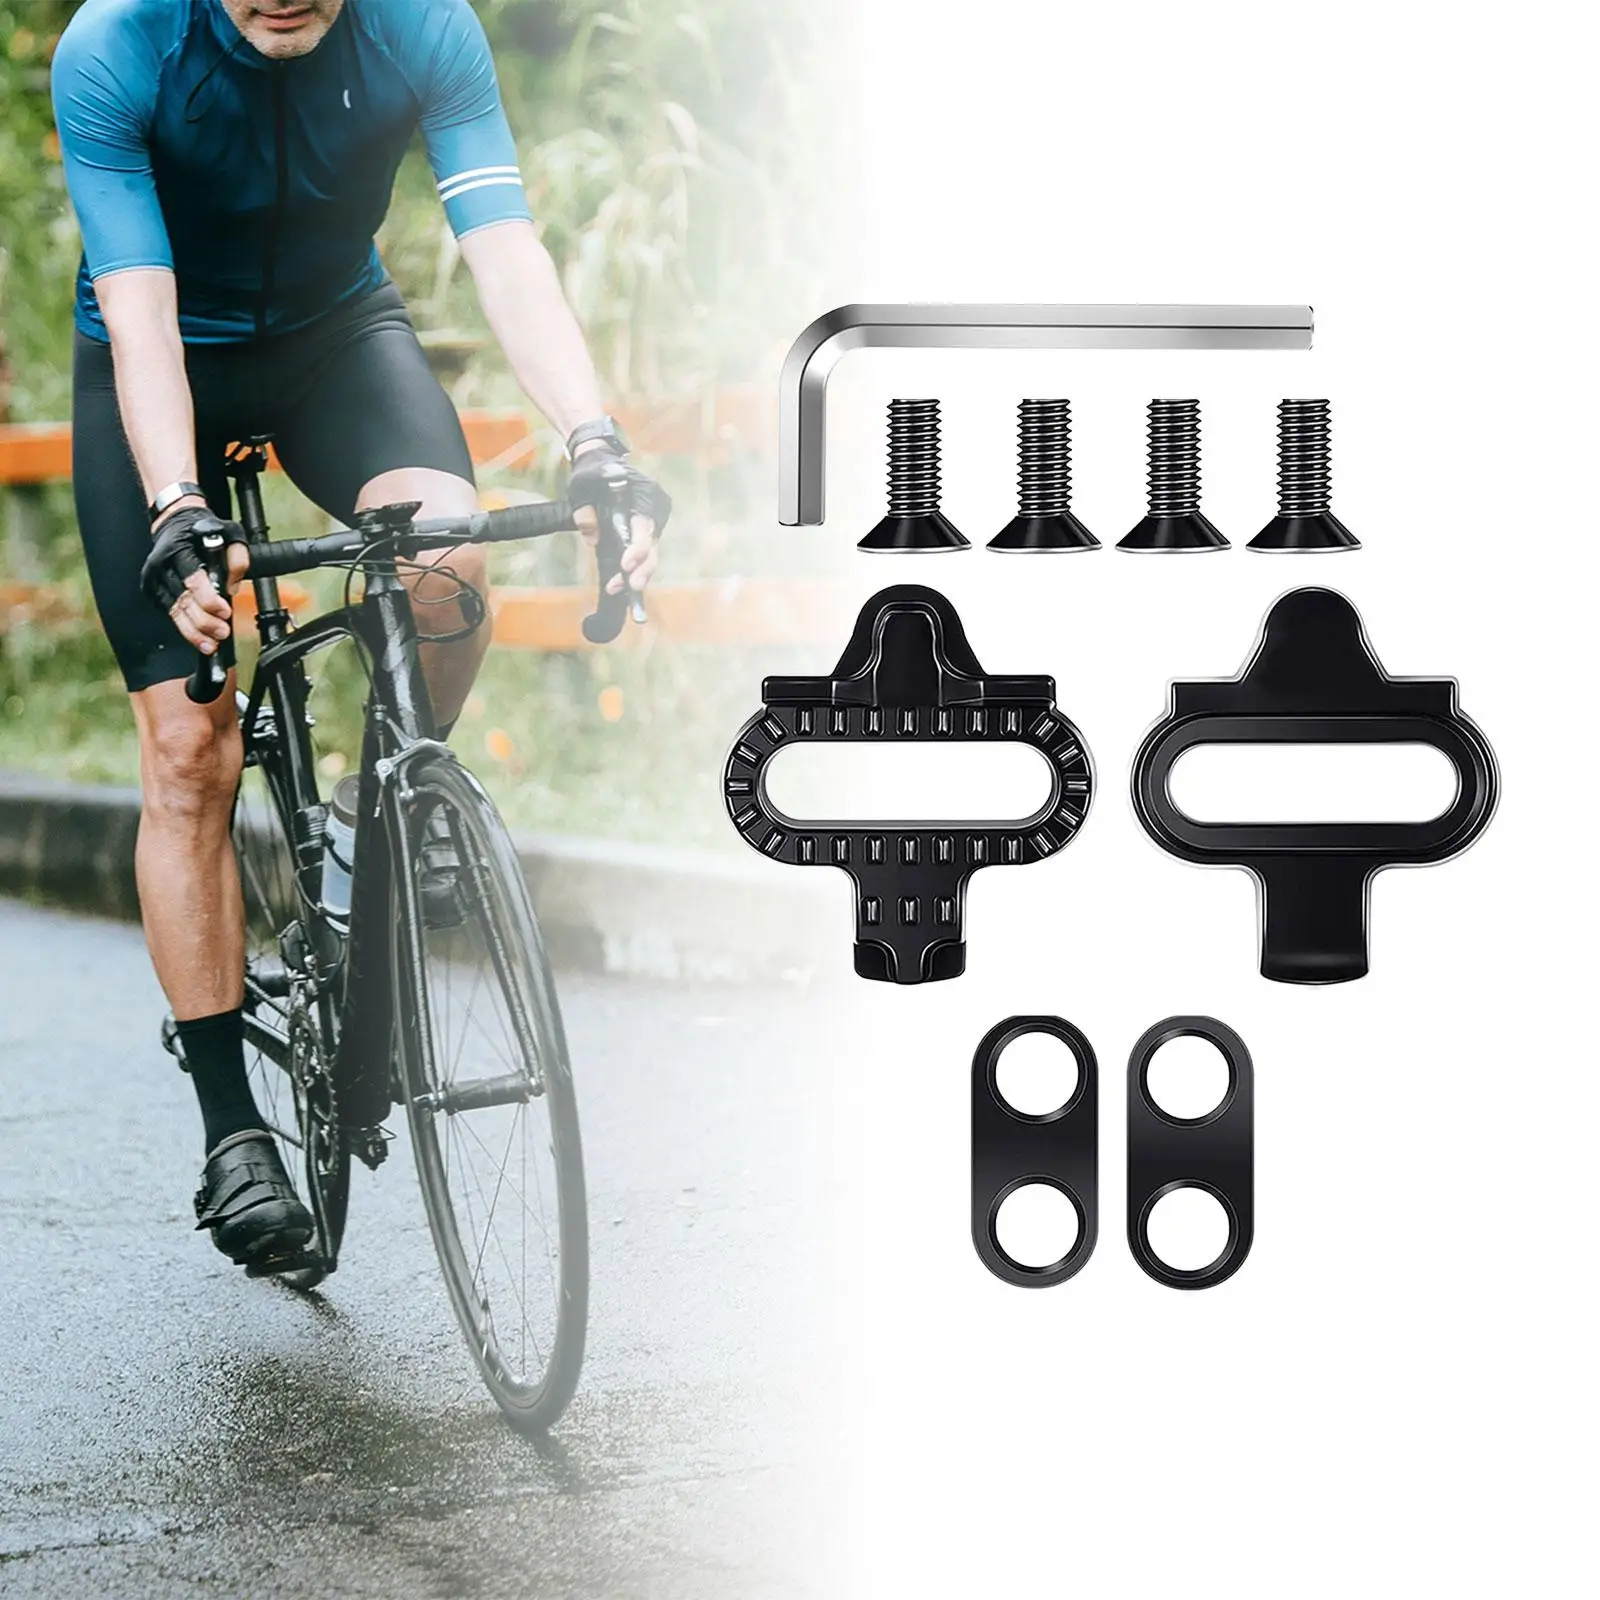 Pedal Lock Riding Shoes Splint Set Cycling Parts Mountain Bikes Professional Durable Practical Bicycle Pedals Cleats Kit